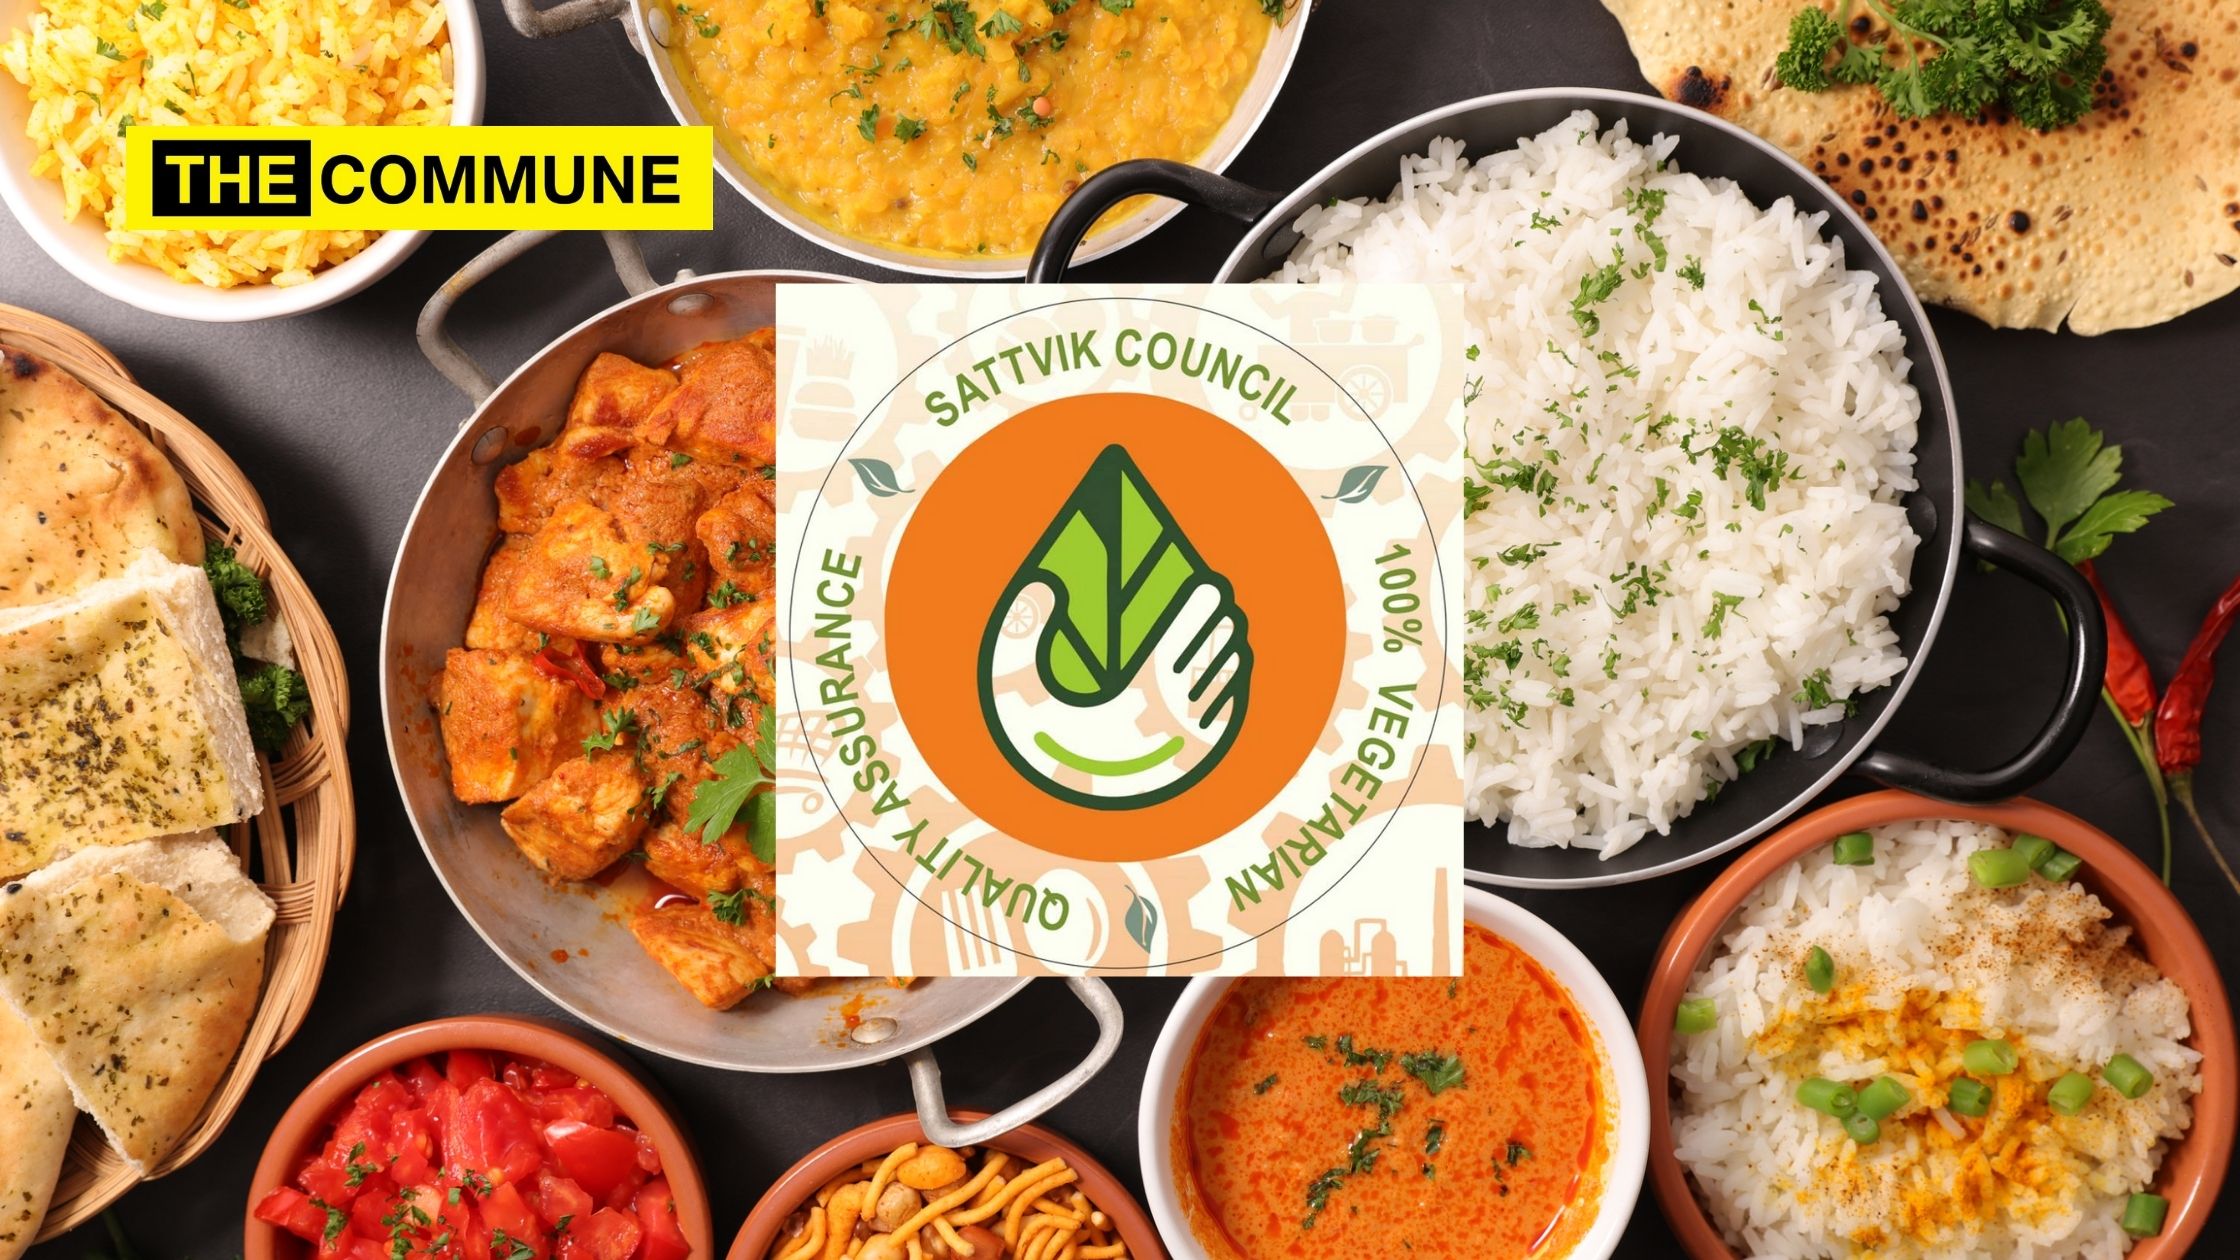 Hindus now have option to buy world's first 'Sattvik' certification for vegetarian food safety and compliance - The Commune